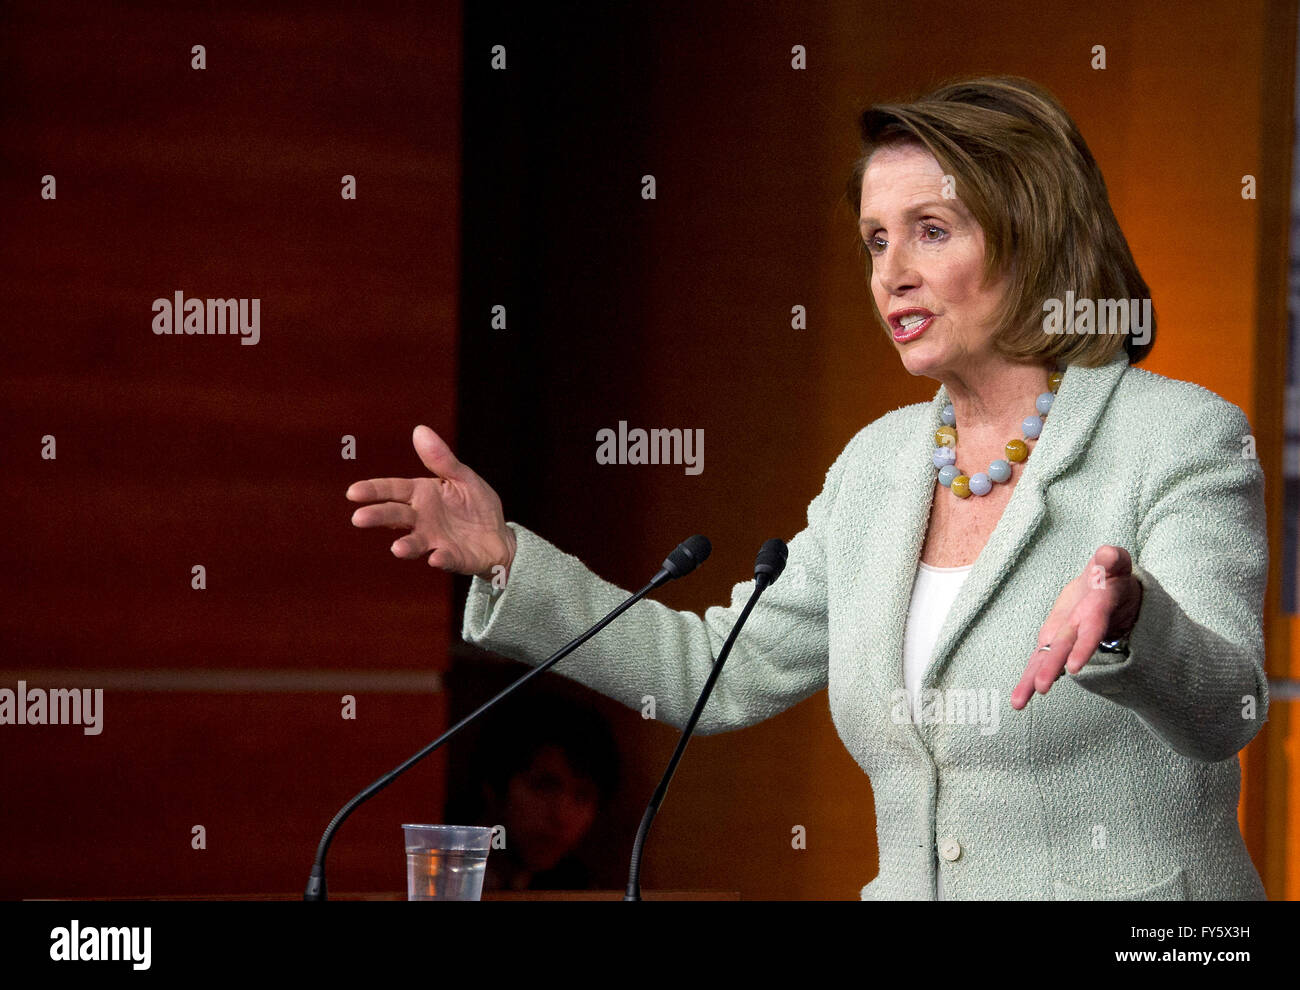 United States House Minority Leader Nancy Pelosi (Democrat of California) conducts her weekly press conference in the US Capitol in Washington, DC on Thursday, April 21, 2016. Credit: Ron Sachs/CNP - NO WIRE SERVICE - Stock Photo